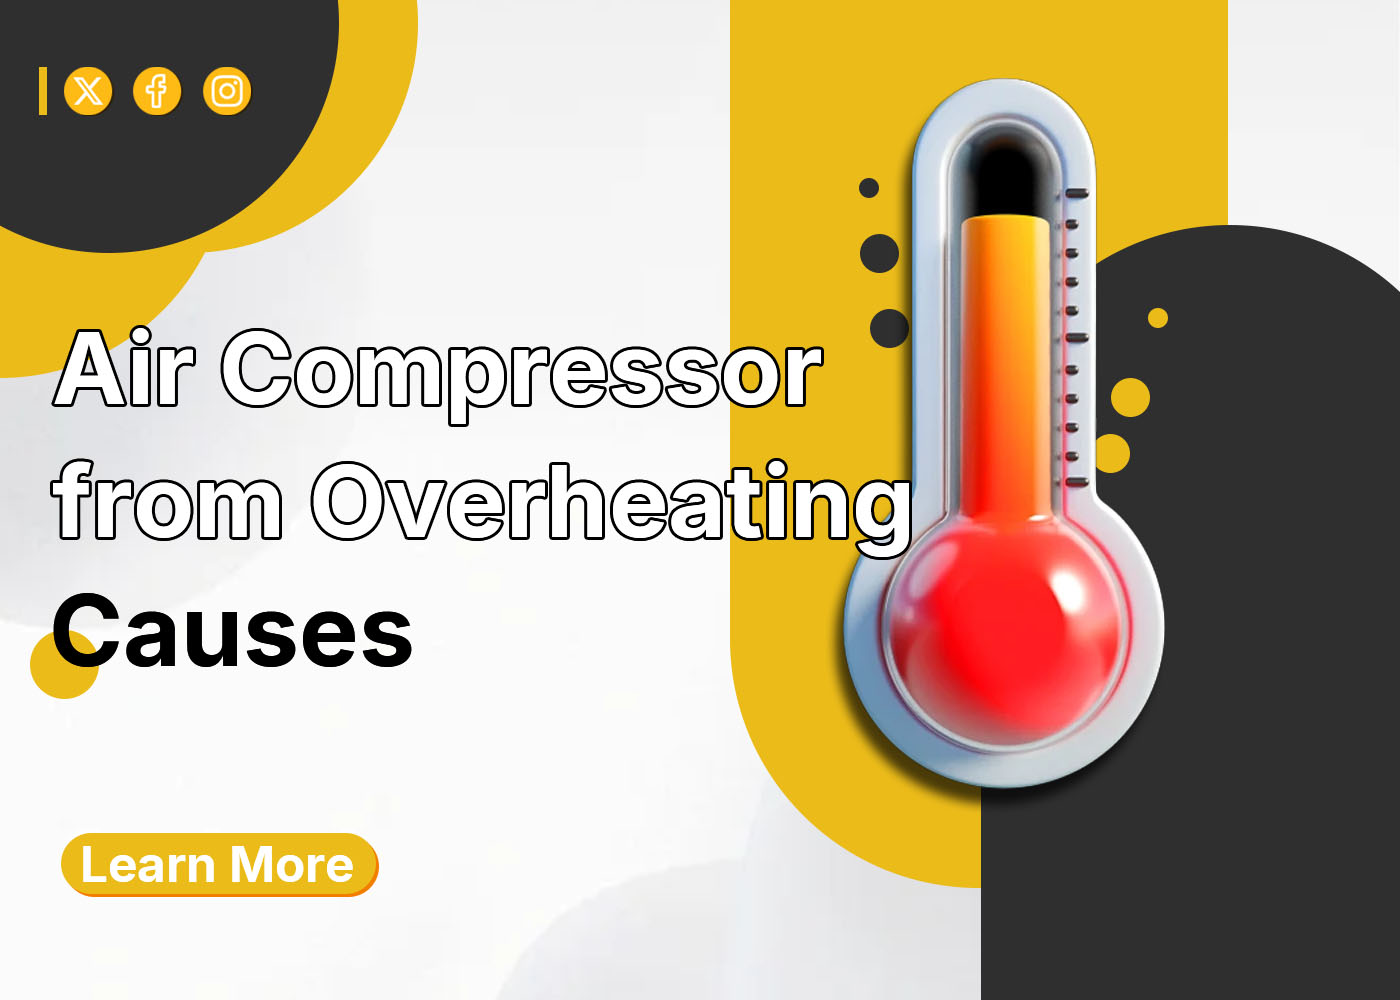 Air Compressor from overheating